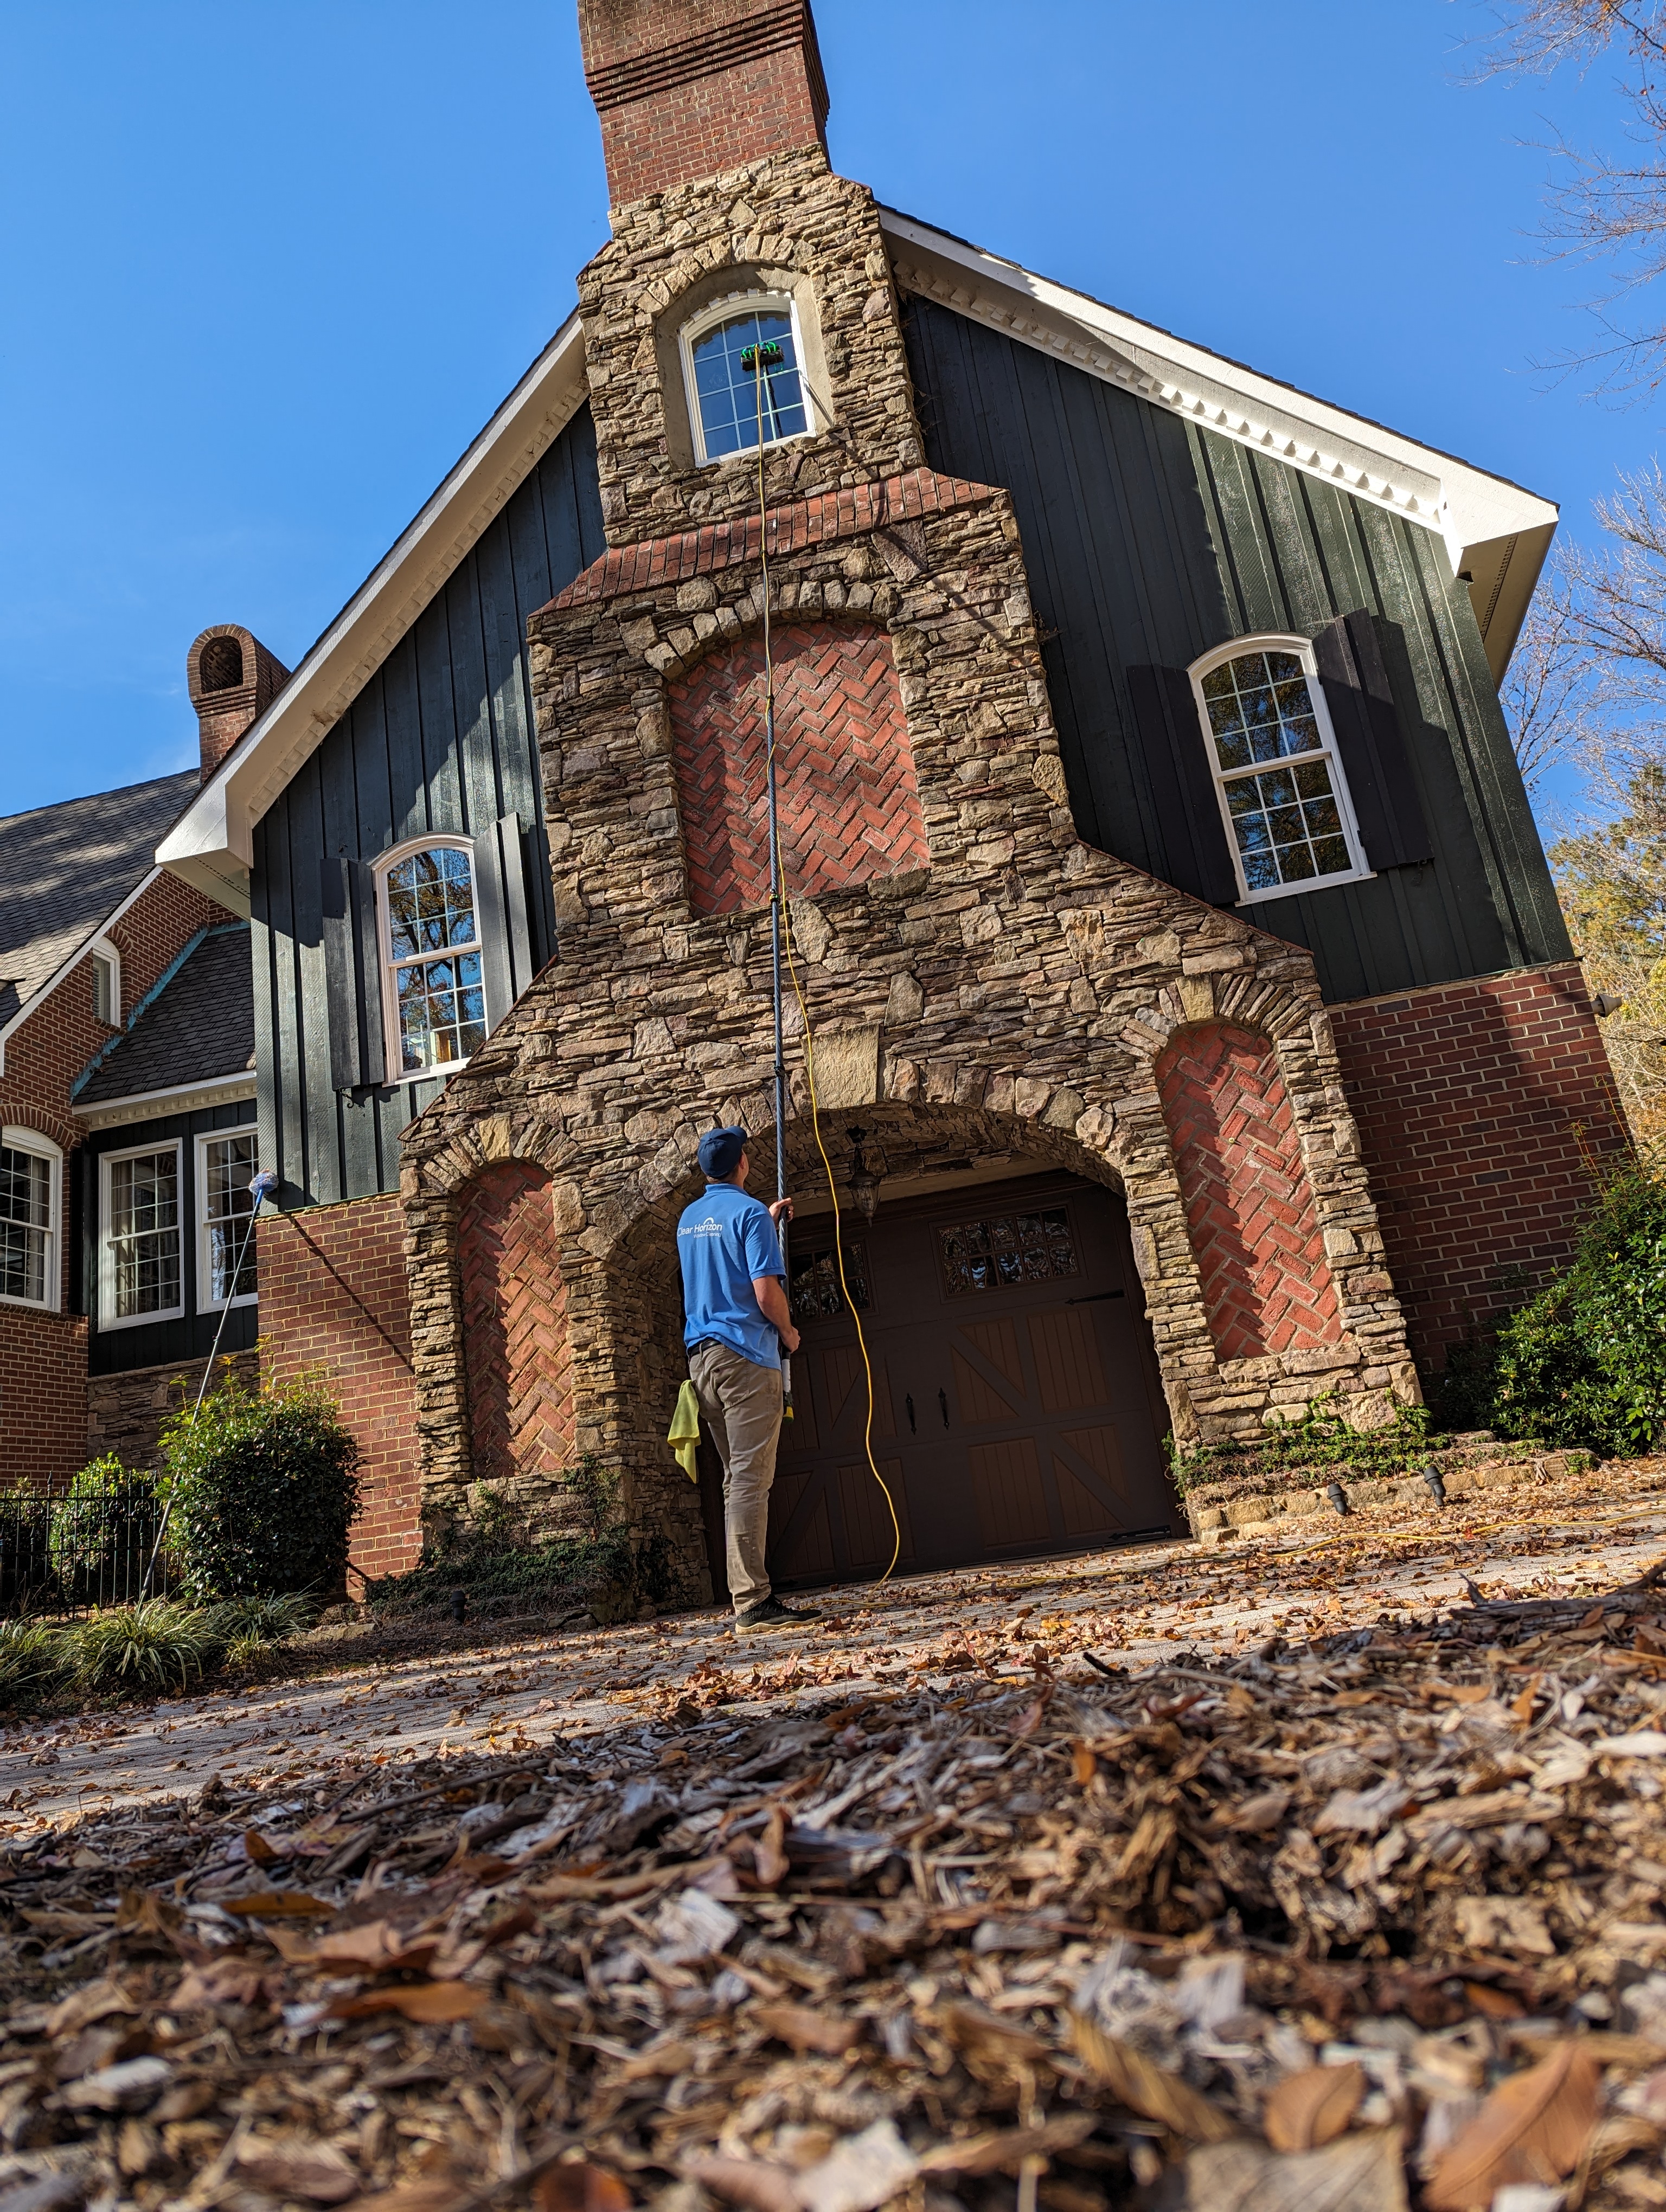 Outstanding Quality Window Cleaning Service in Weddington, NC